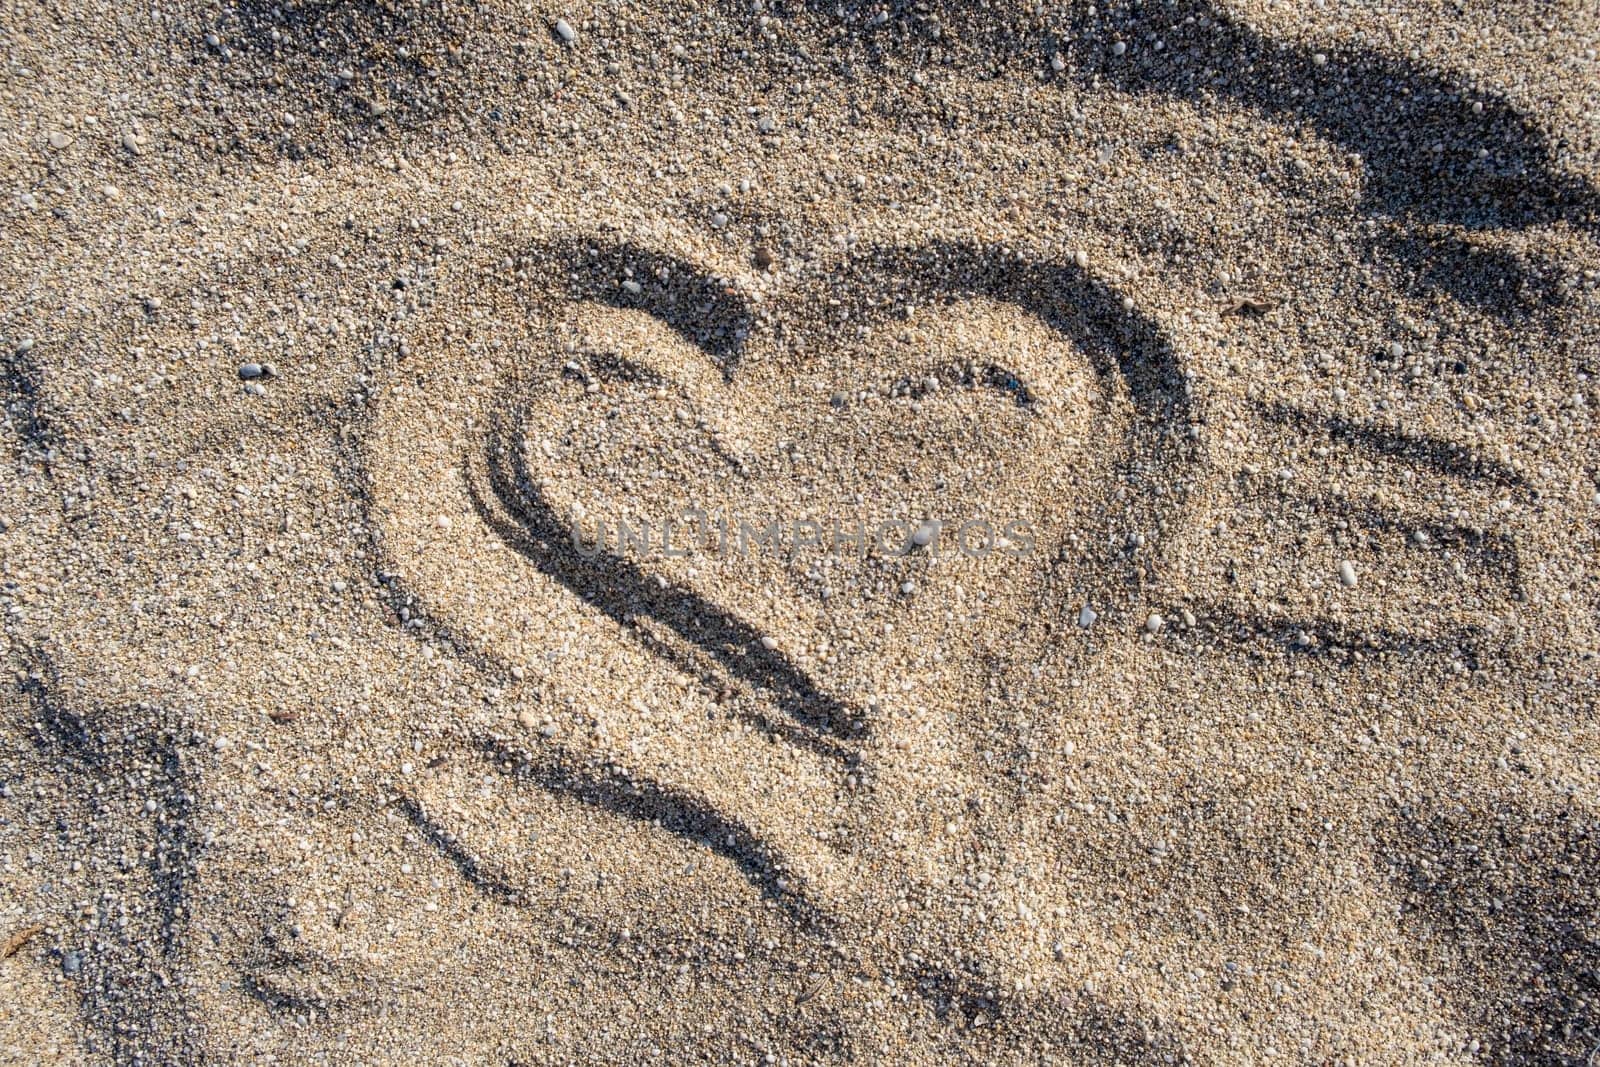 Drawing heart shape love concept on sand at the beach with vacation holiday summer travel background. Heart shape and footprint on sand.